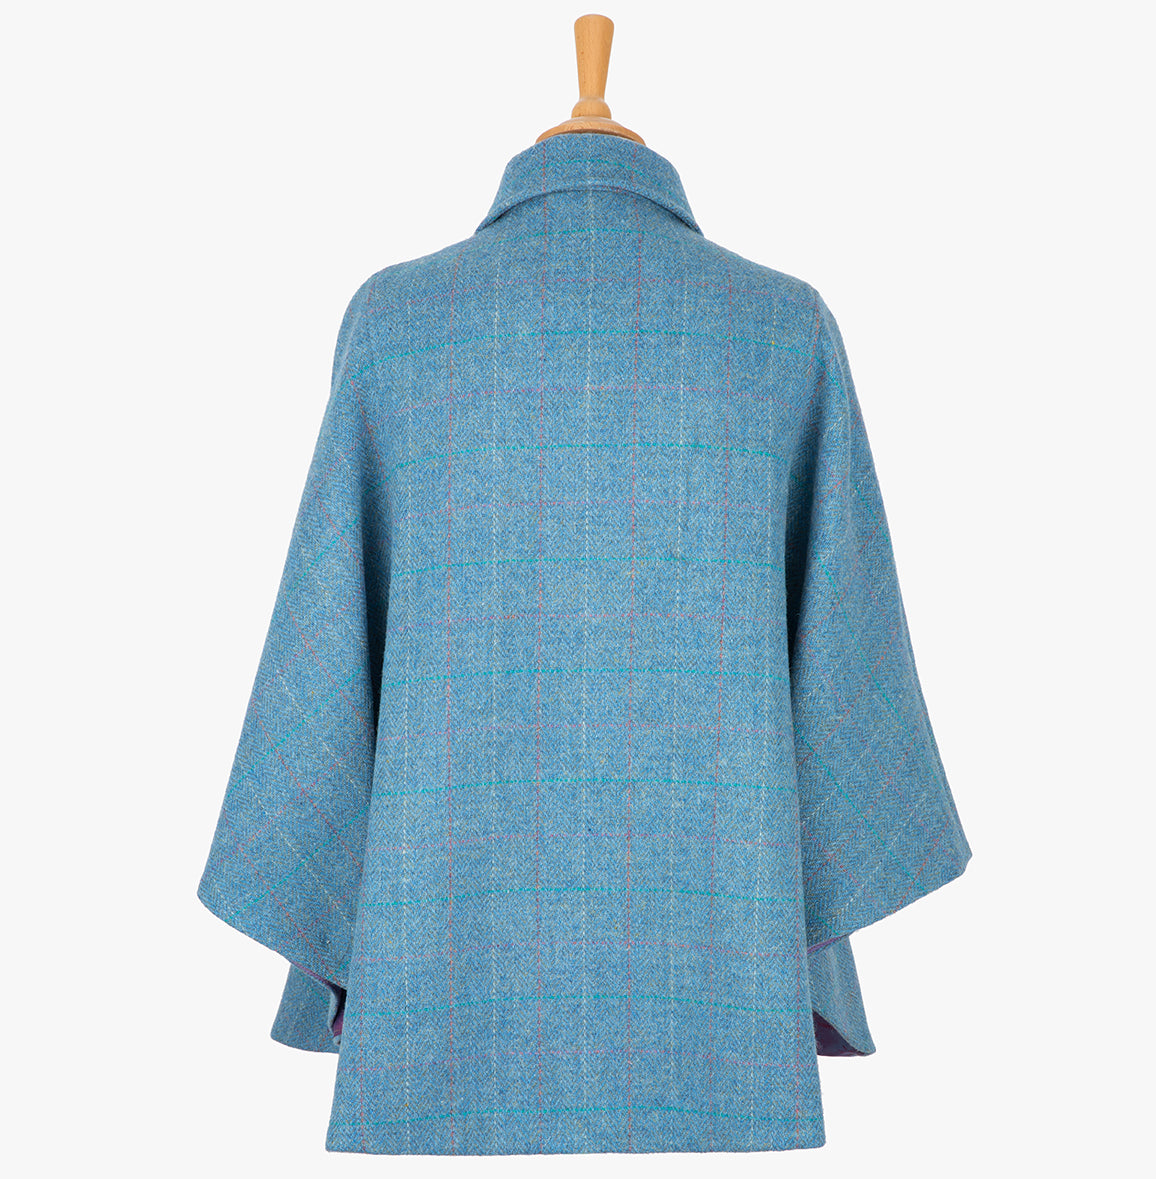 This is the rear view of the cape in sky blue, the colour is sky blue with a white, red and subtle turquoise overcheck. You can see the collar folded down and the cape draping beautifully at the back.